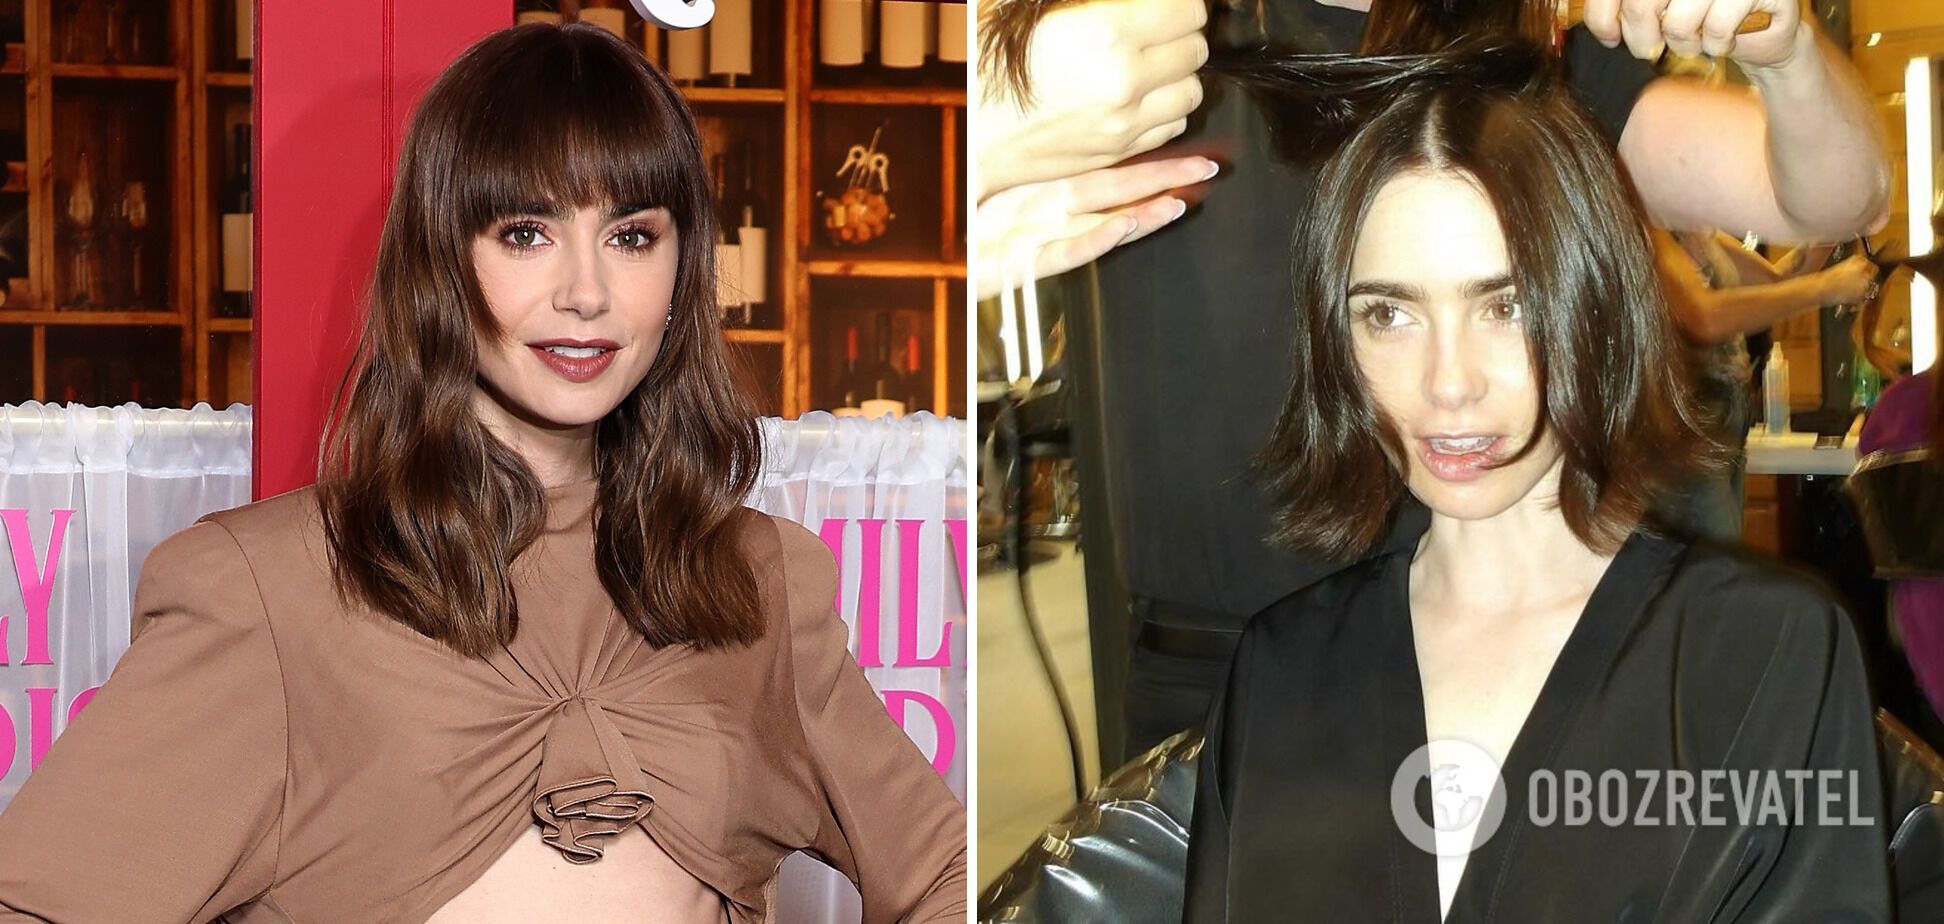 Emily in Paris star Lily Collins swapped her long locks for an elegant bob. Photos before and after